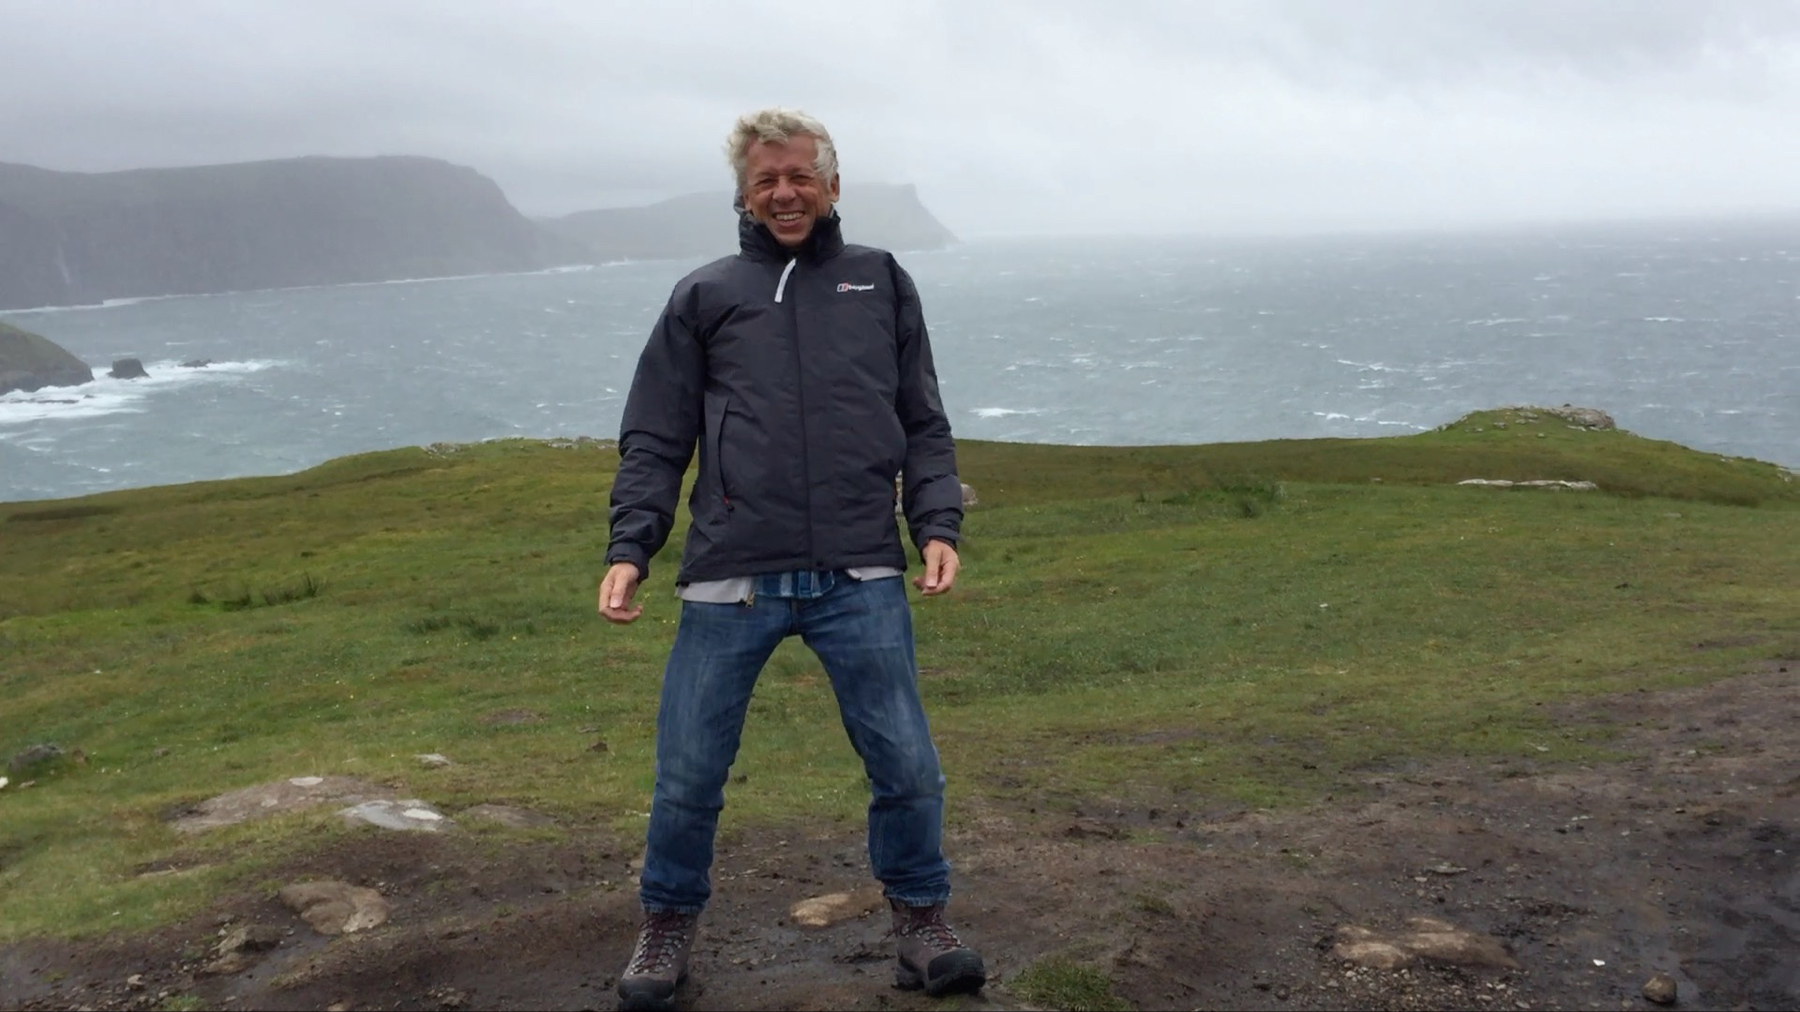 Me leaning into the strong winds on the Isle of Skye